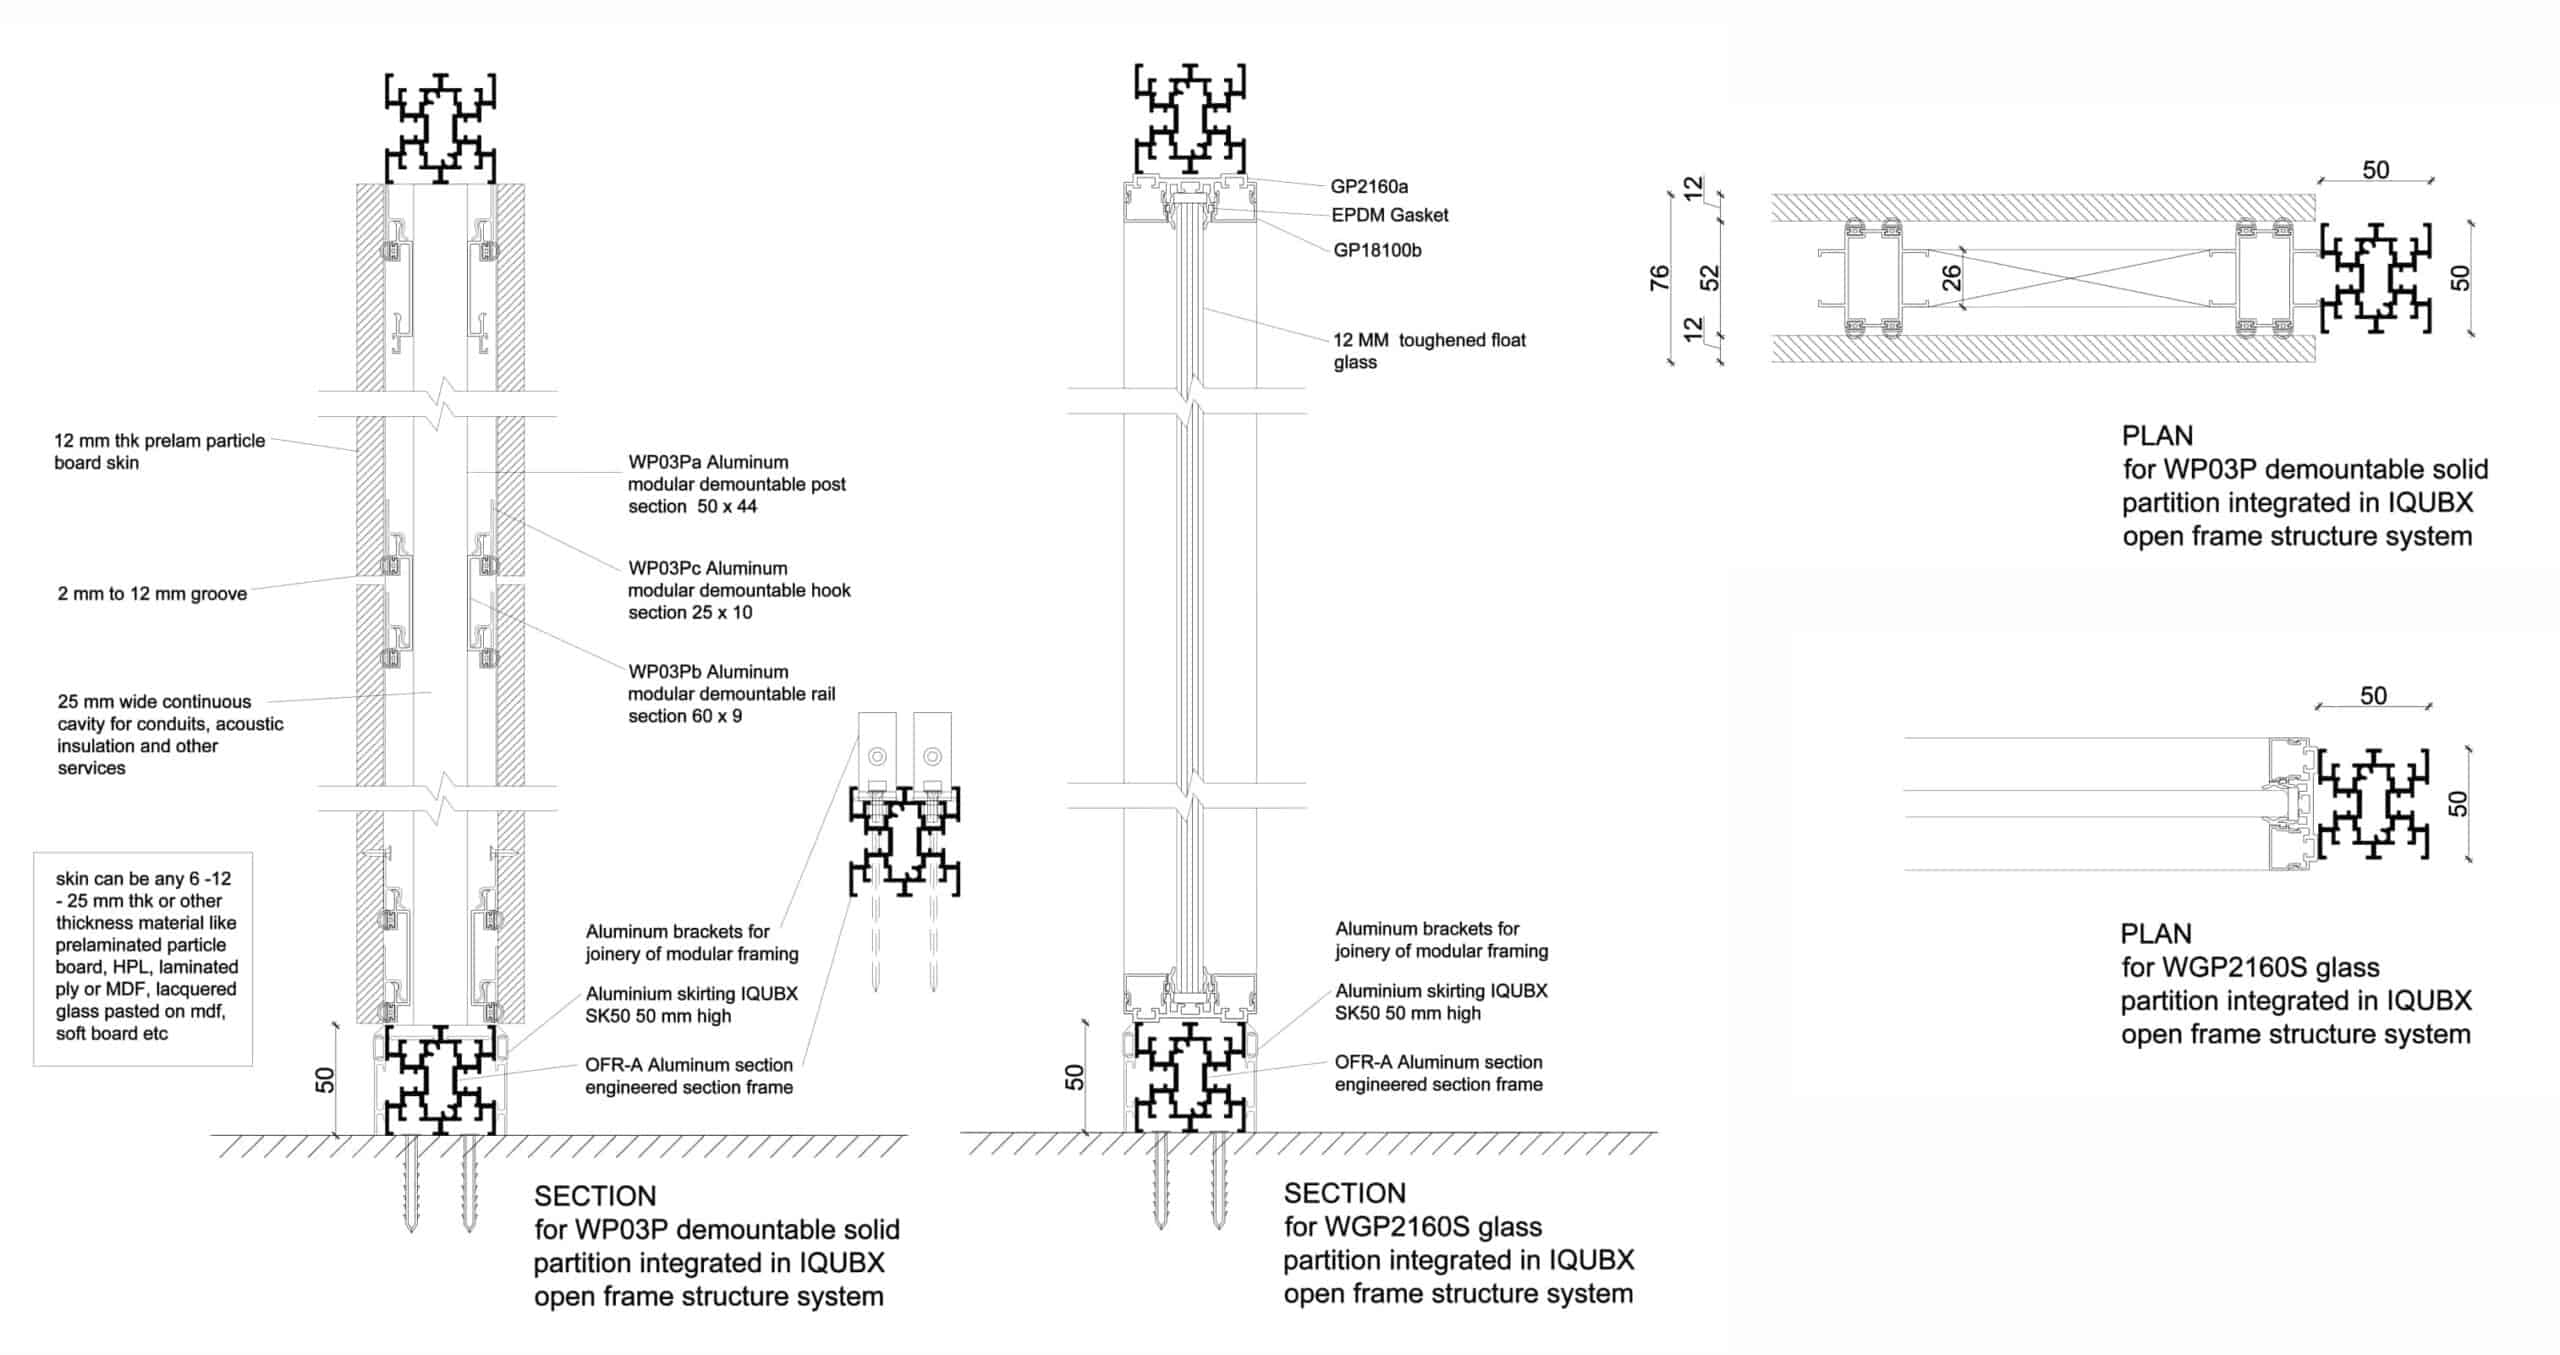 typical details of open frame structure system for brochure